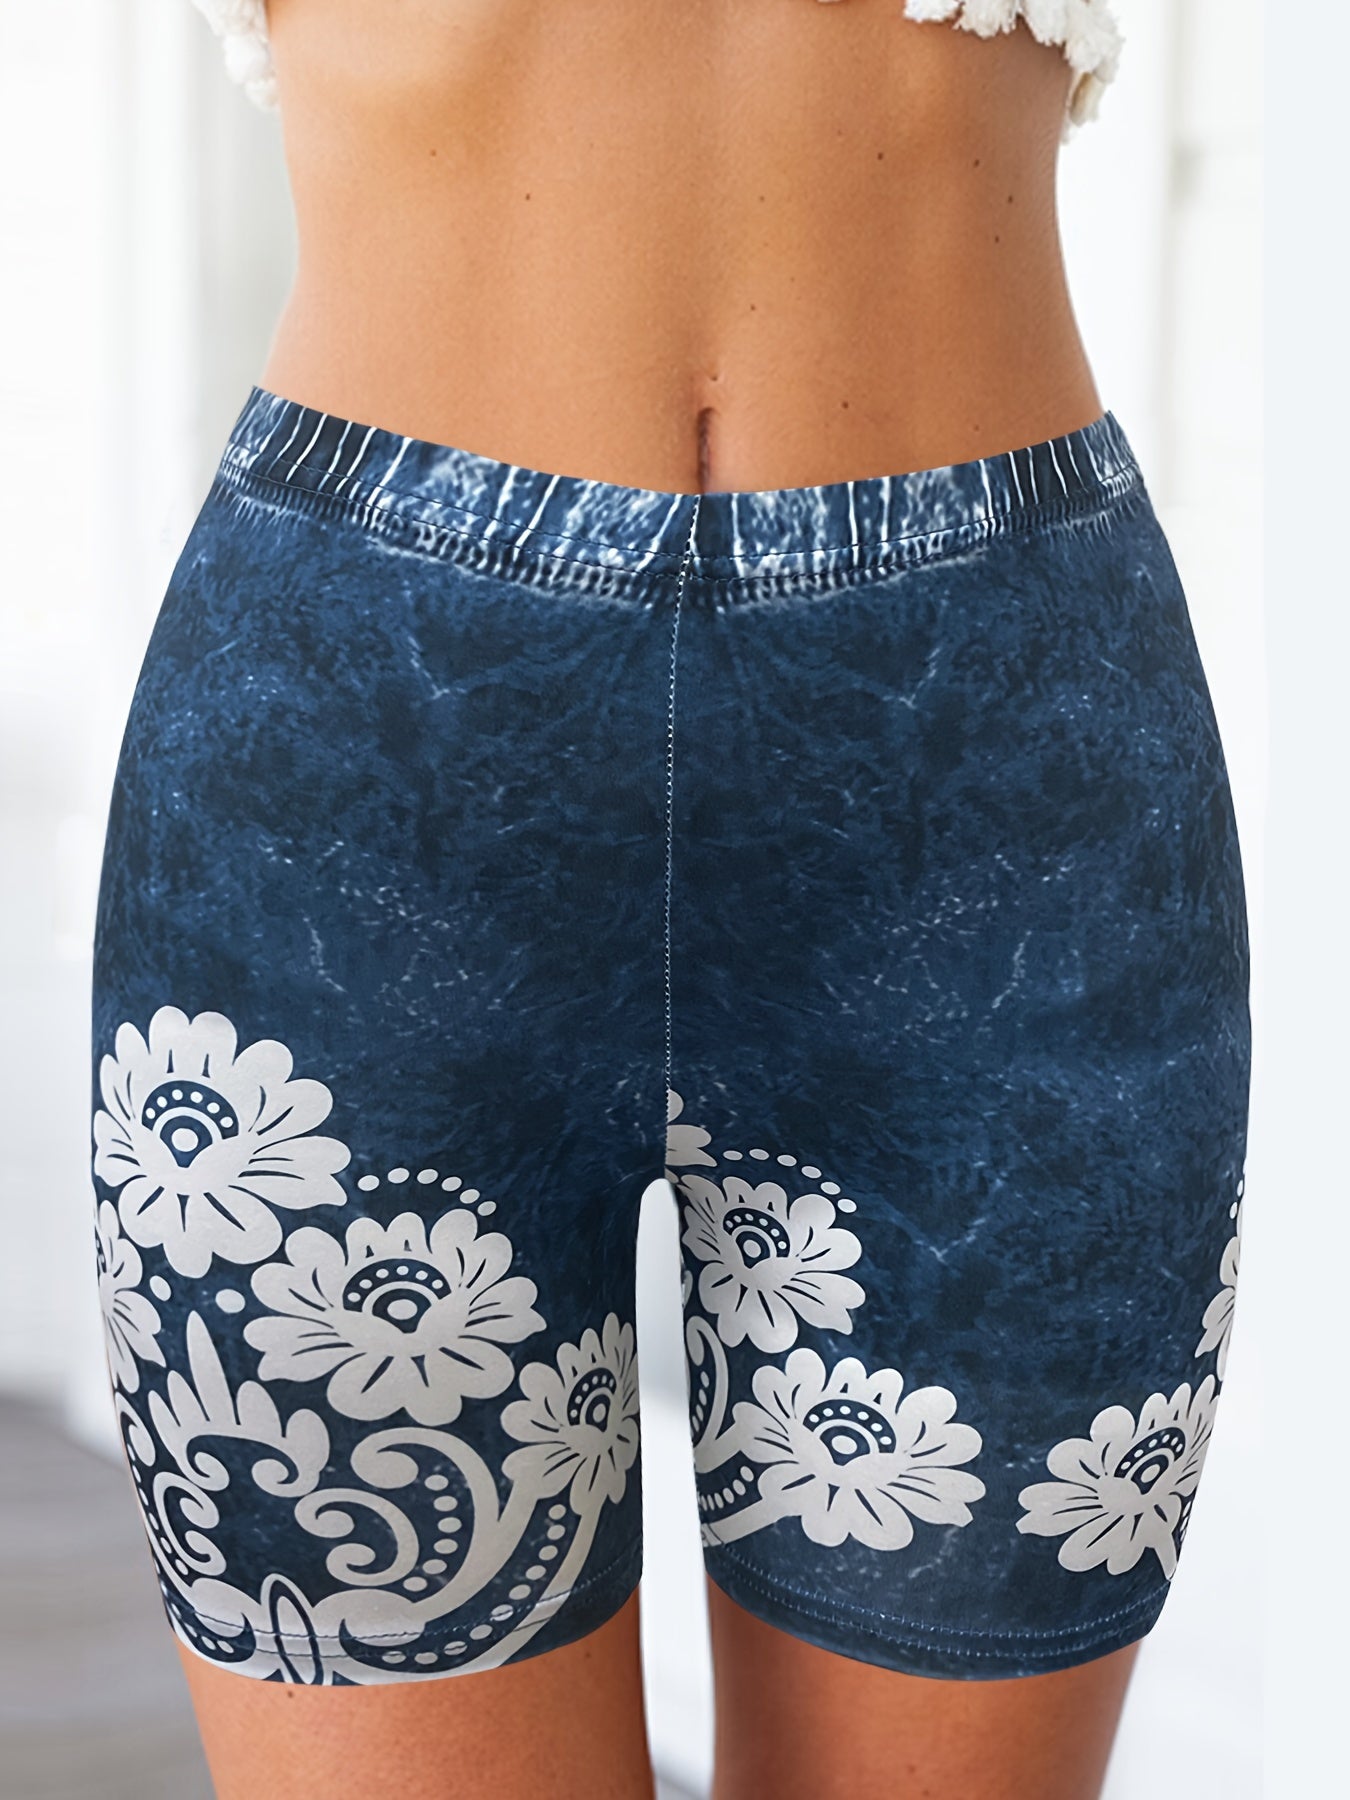 "Fashion Floral Print High Waisted Butt Lifting Yoga Shorts for Women's Workout Running and Activewear"